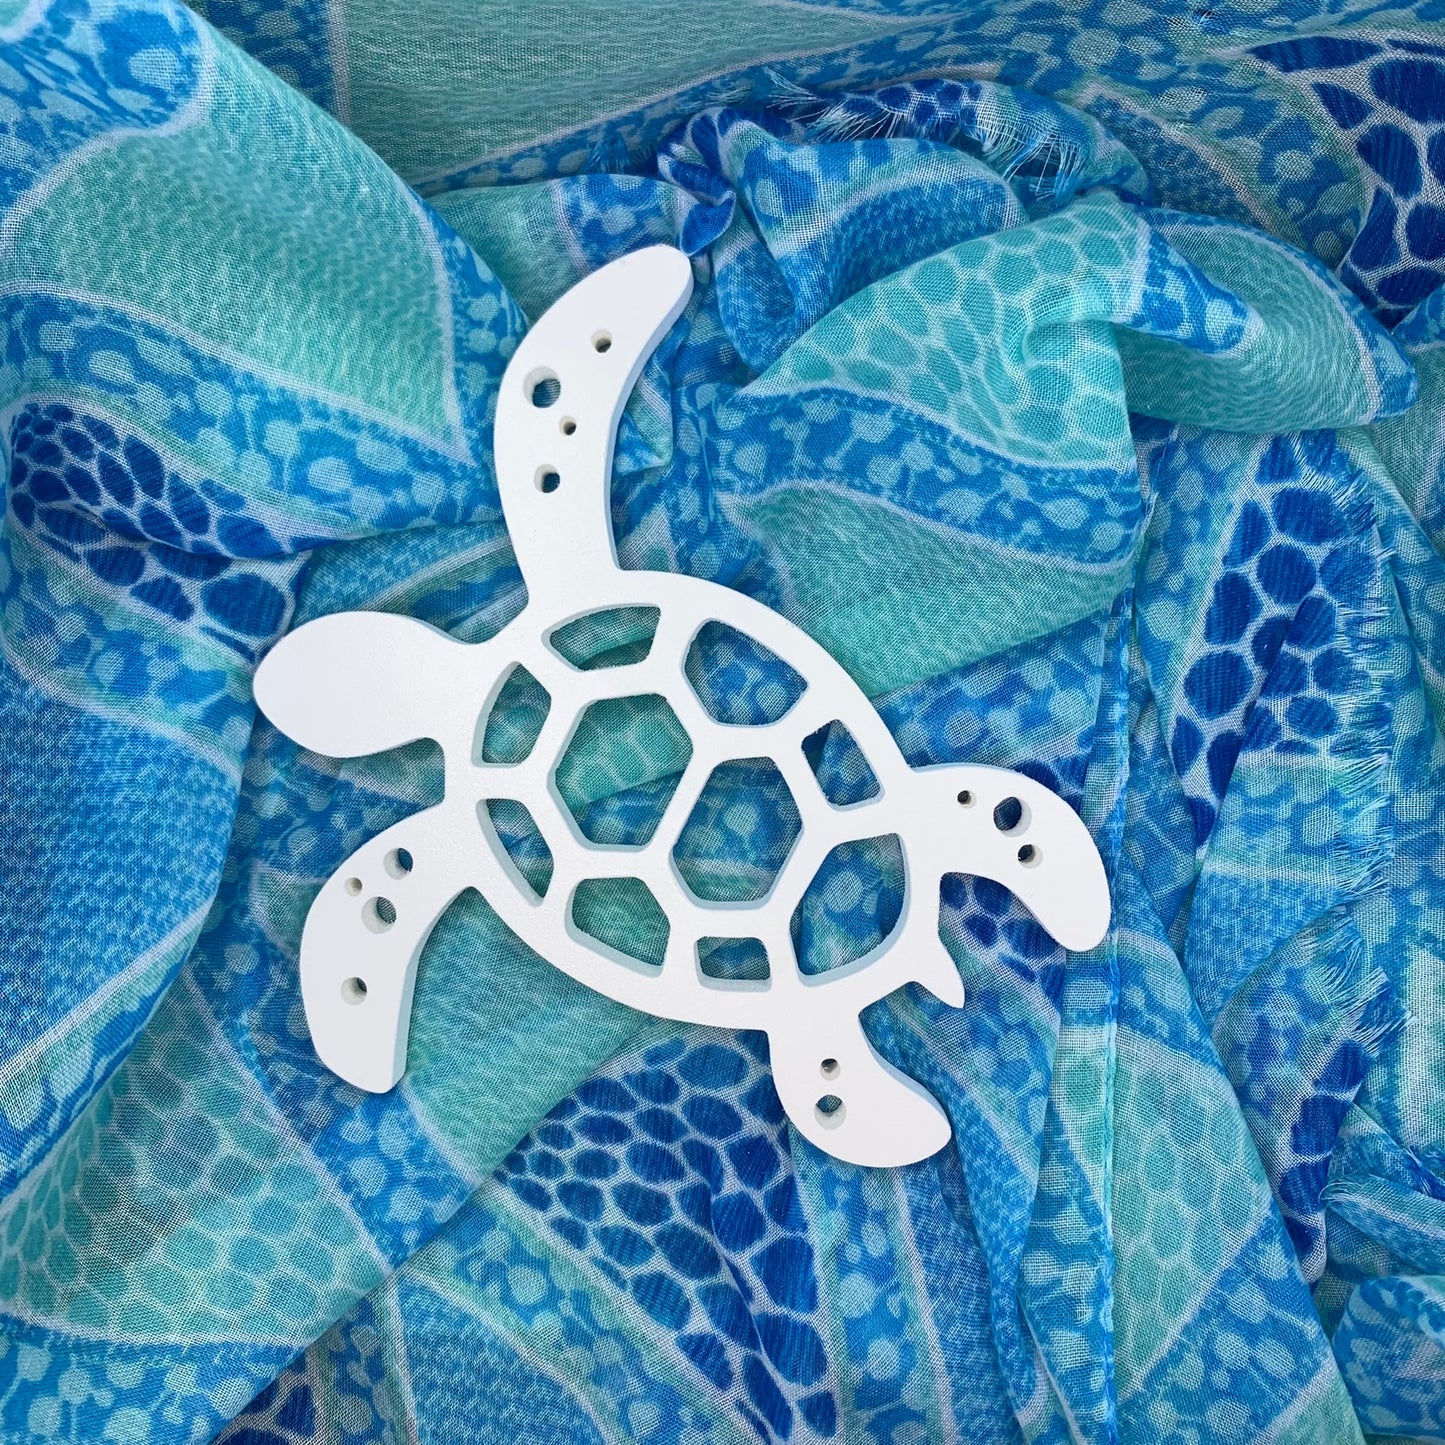 Shutter Embellishments - Turtle 2021 Wall Art Small approx 8" x 7", Custom, Outdoor Decor, Tropical, Ships Free to Mainland USA